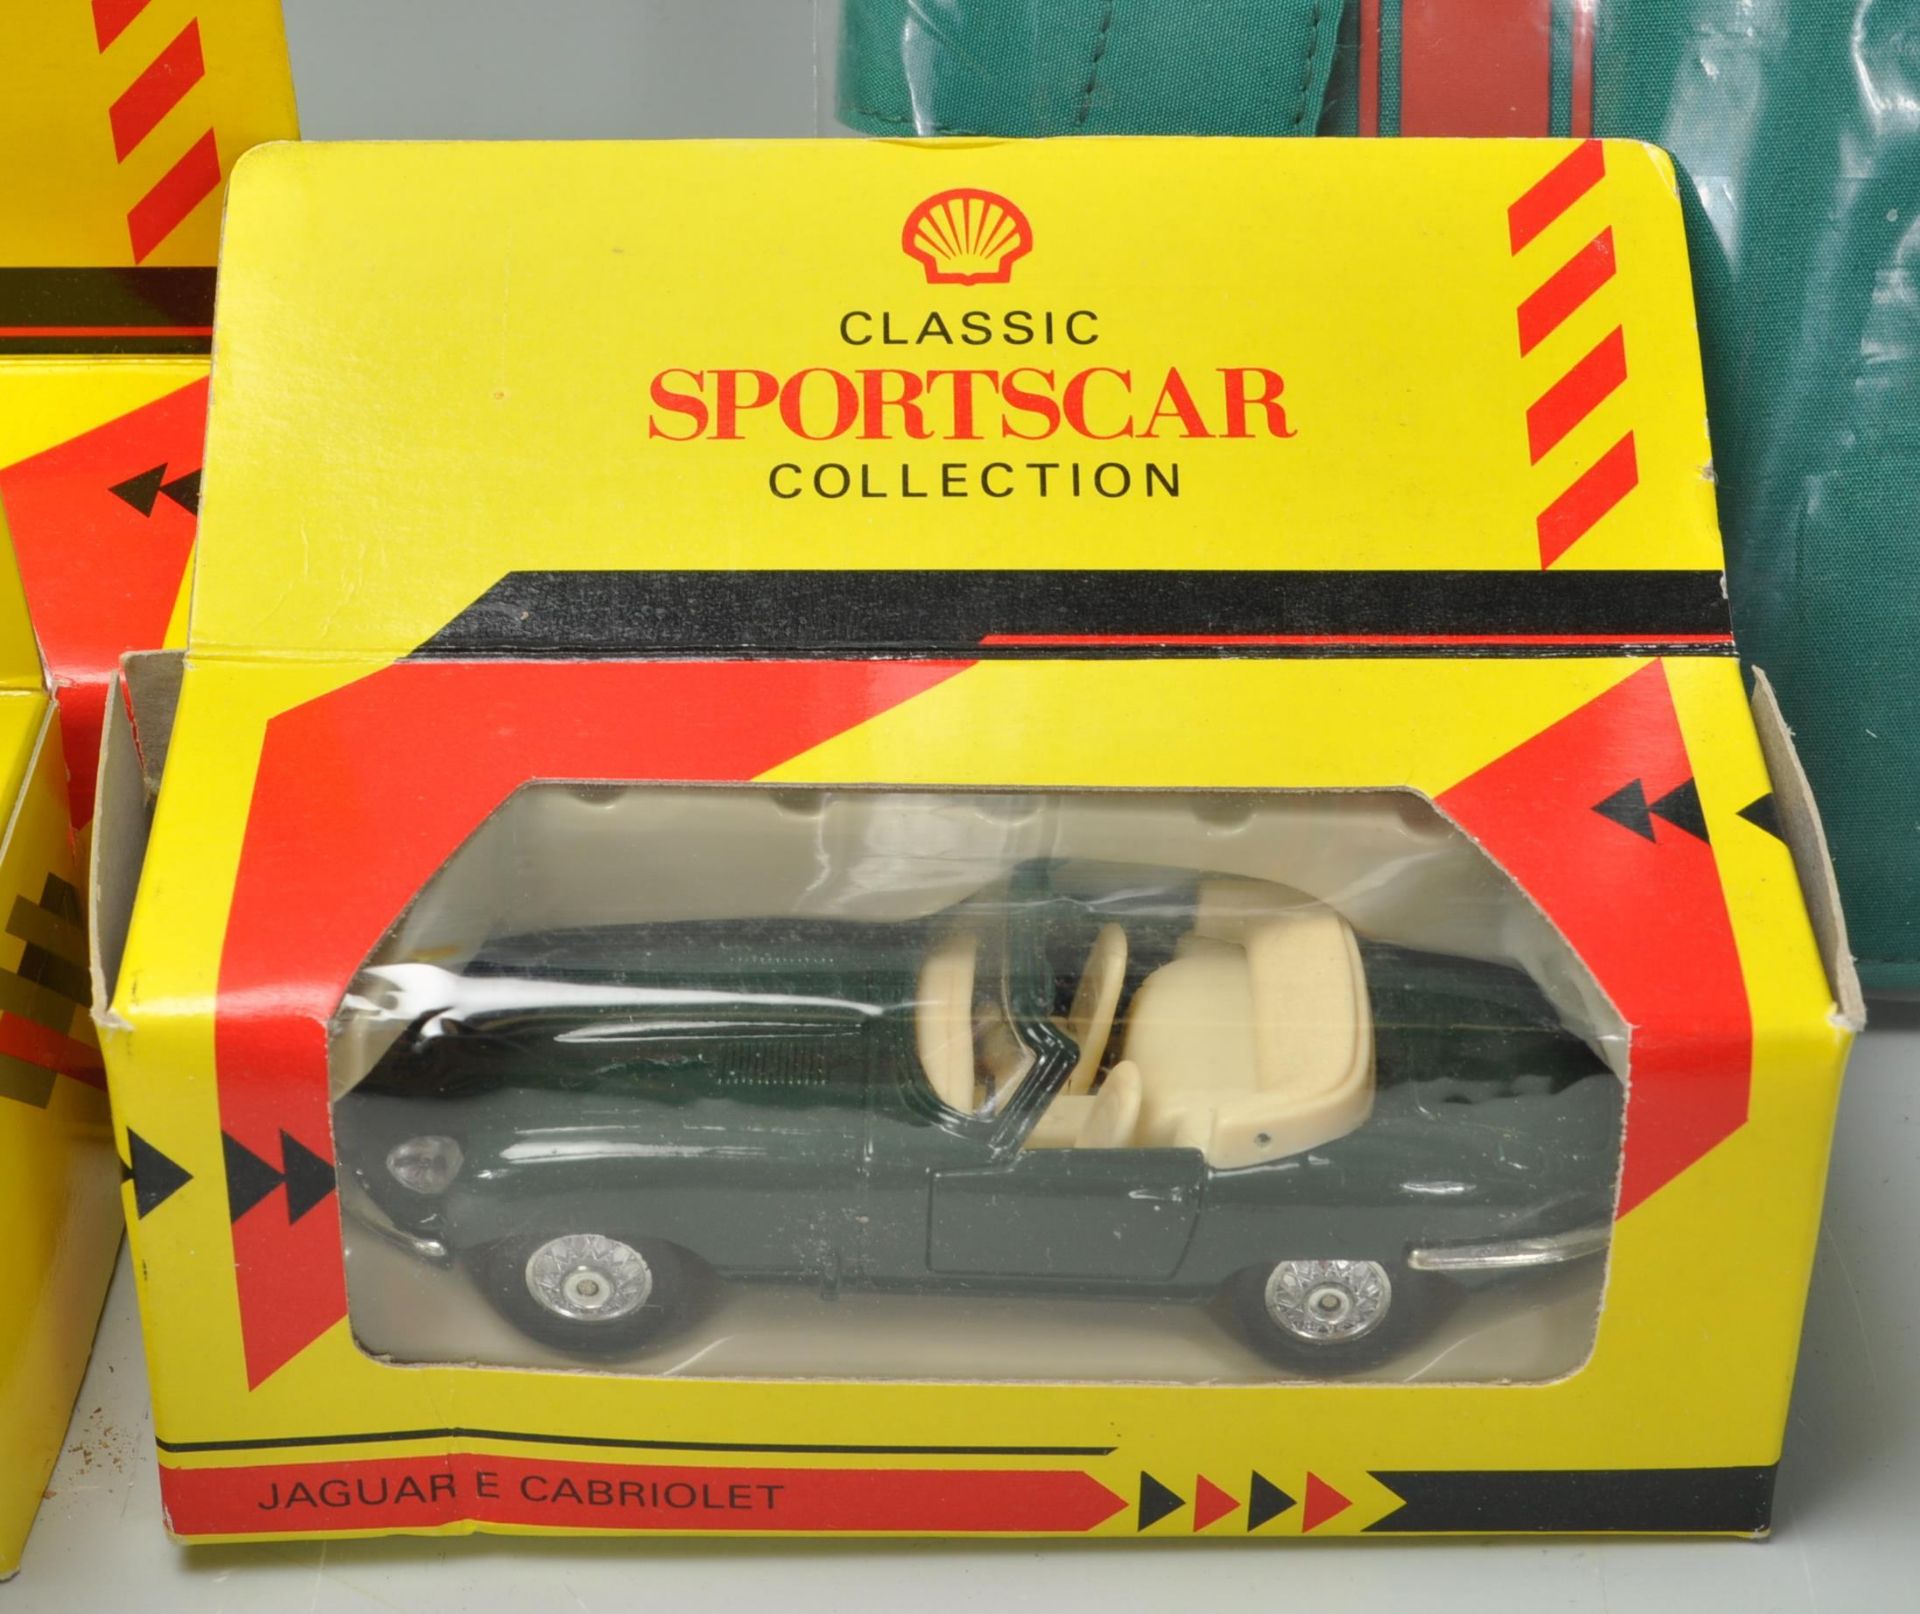 COLLECTION OF VINTAGE 20TH CENTURY DIE CAST MODELS AND EDDIE STOBART RELATED MEMORABILIA - Image 4 of 7